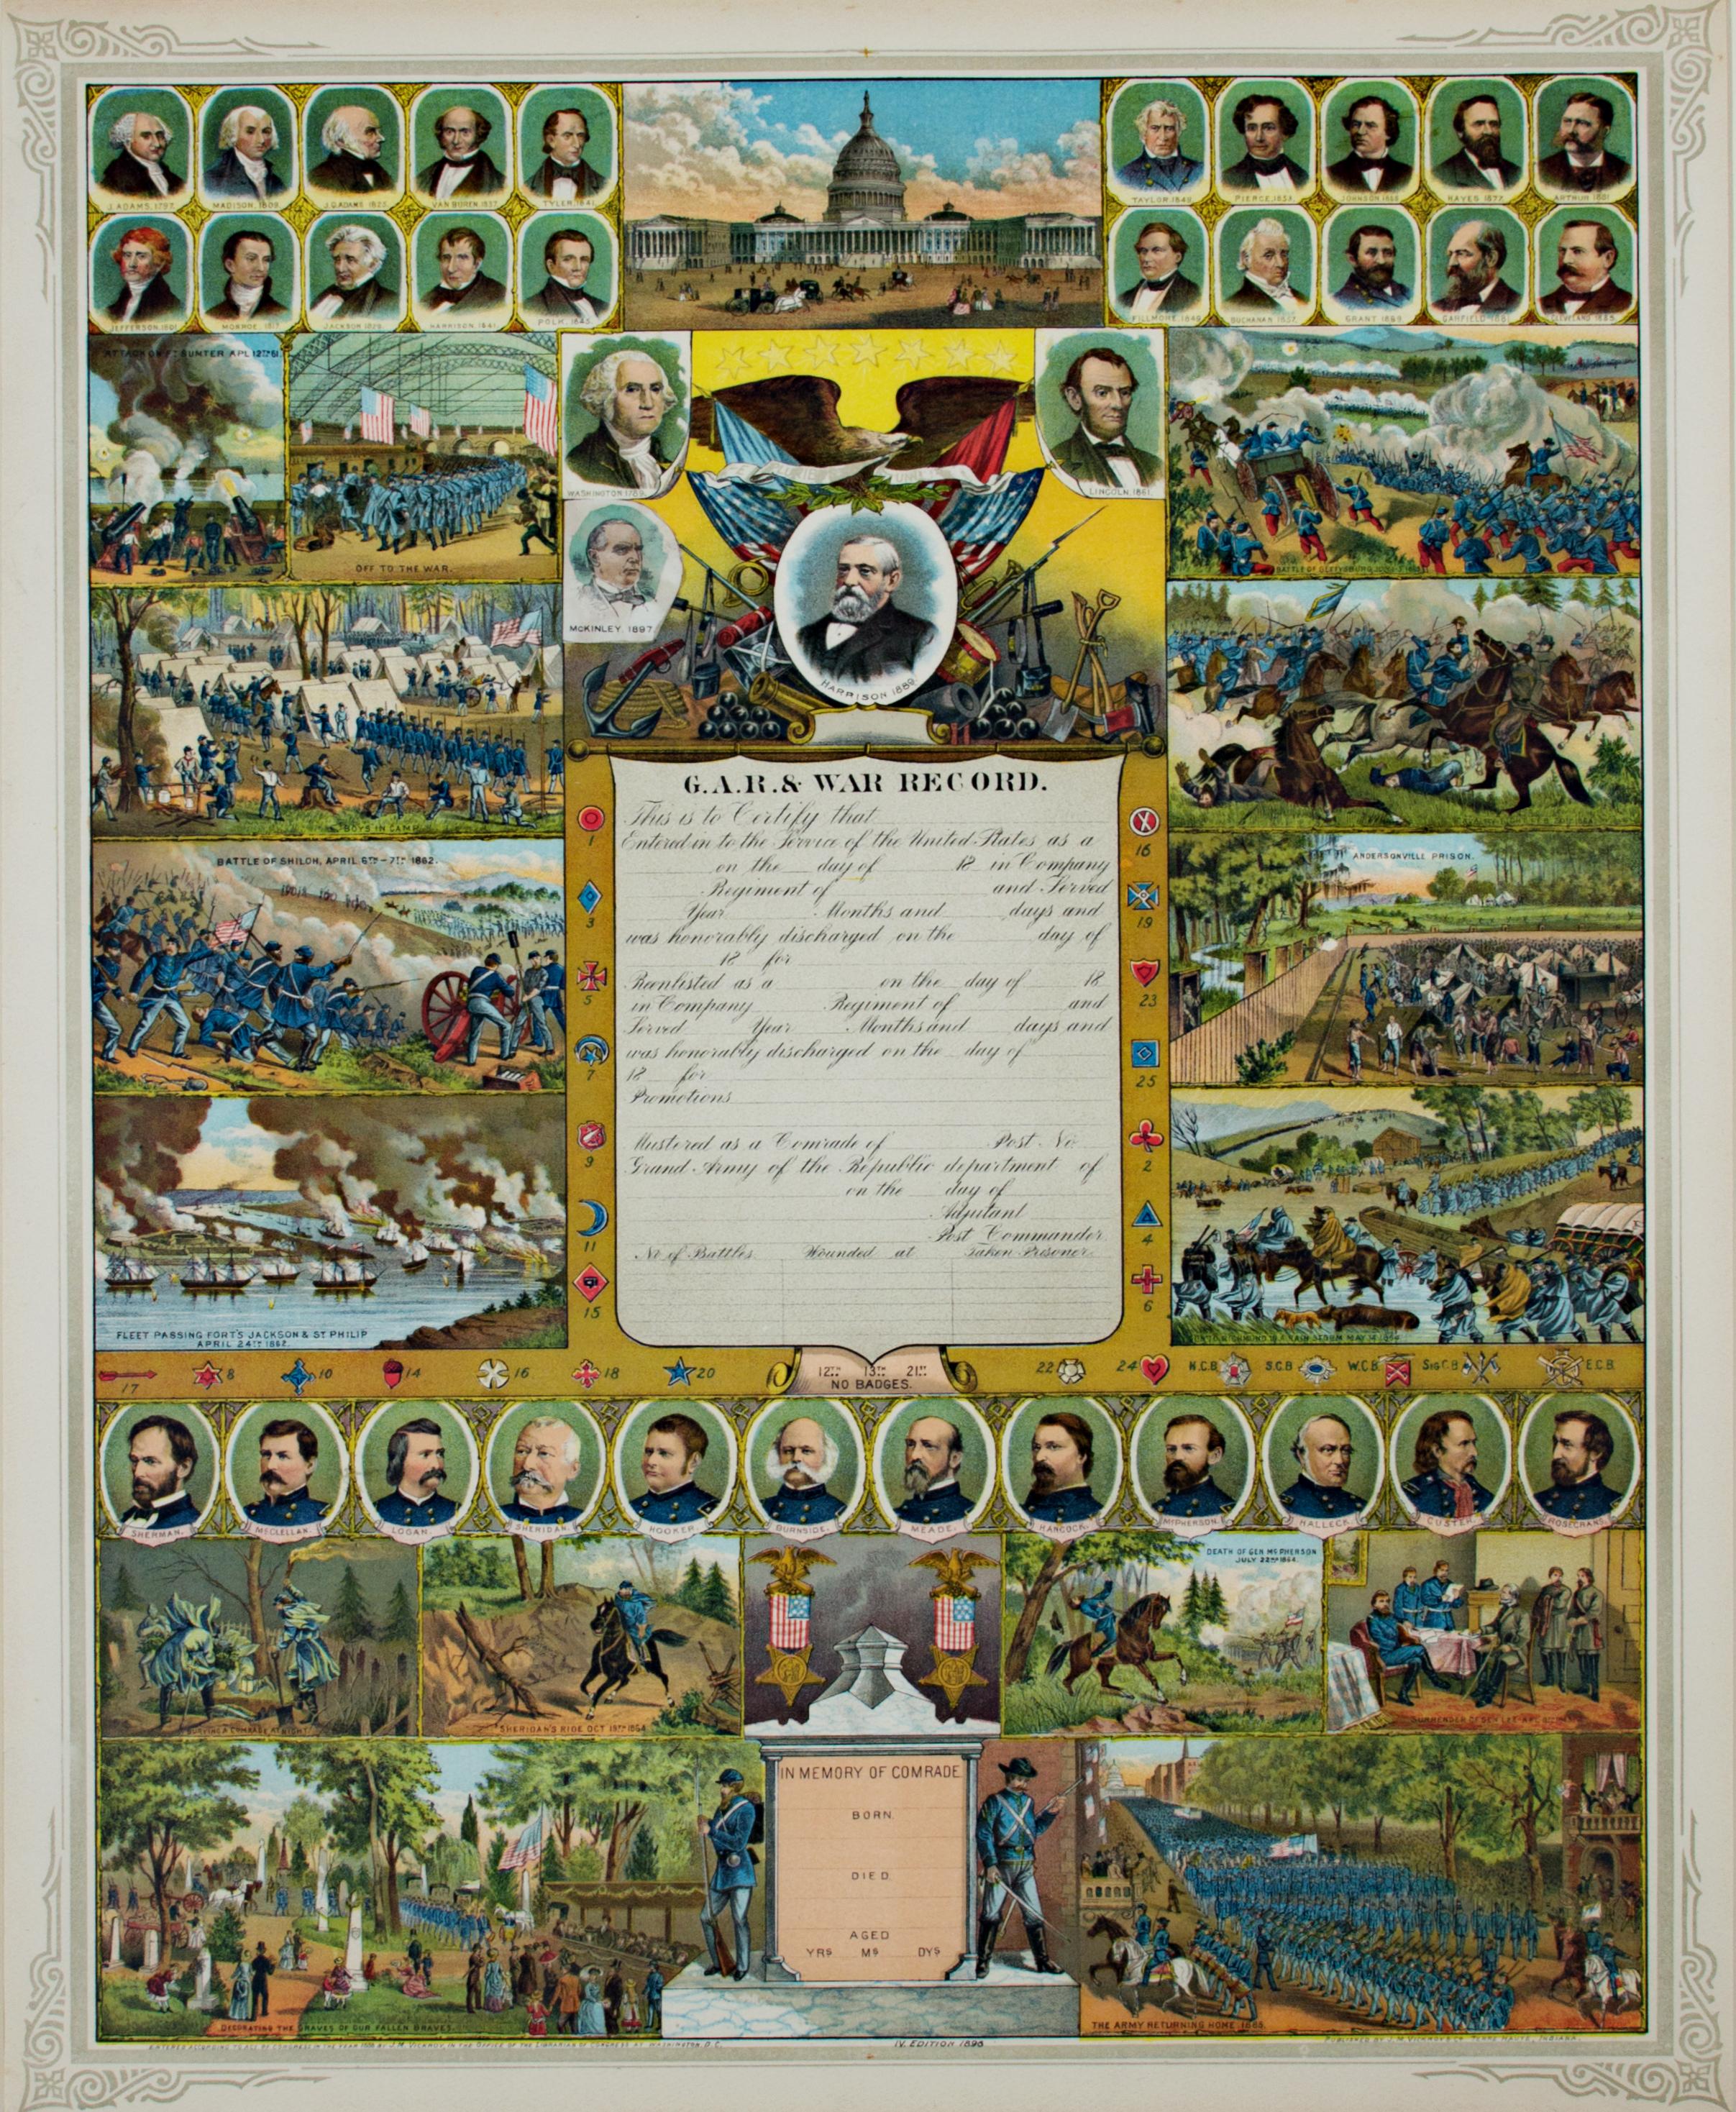 'Government Accounts Registry & War Record' original chromolithograph - Print by J.M. Vickroy & Co.